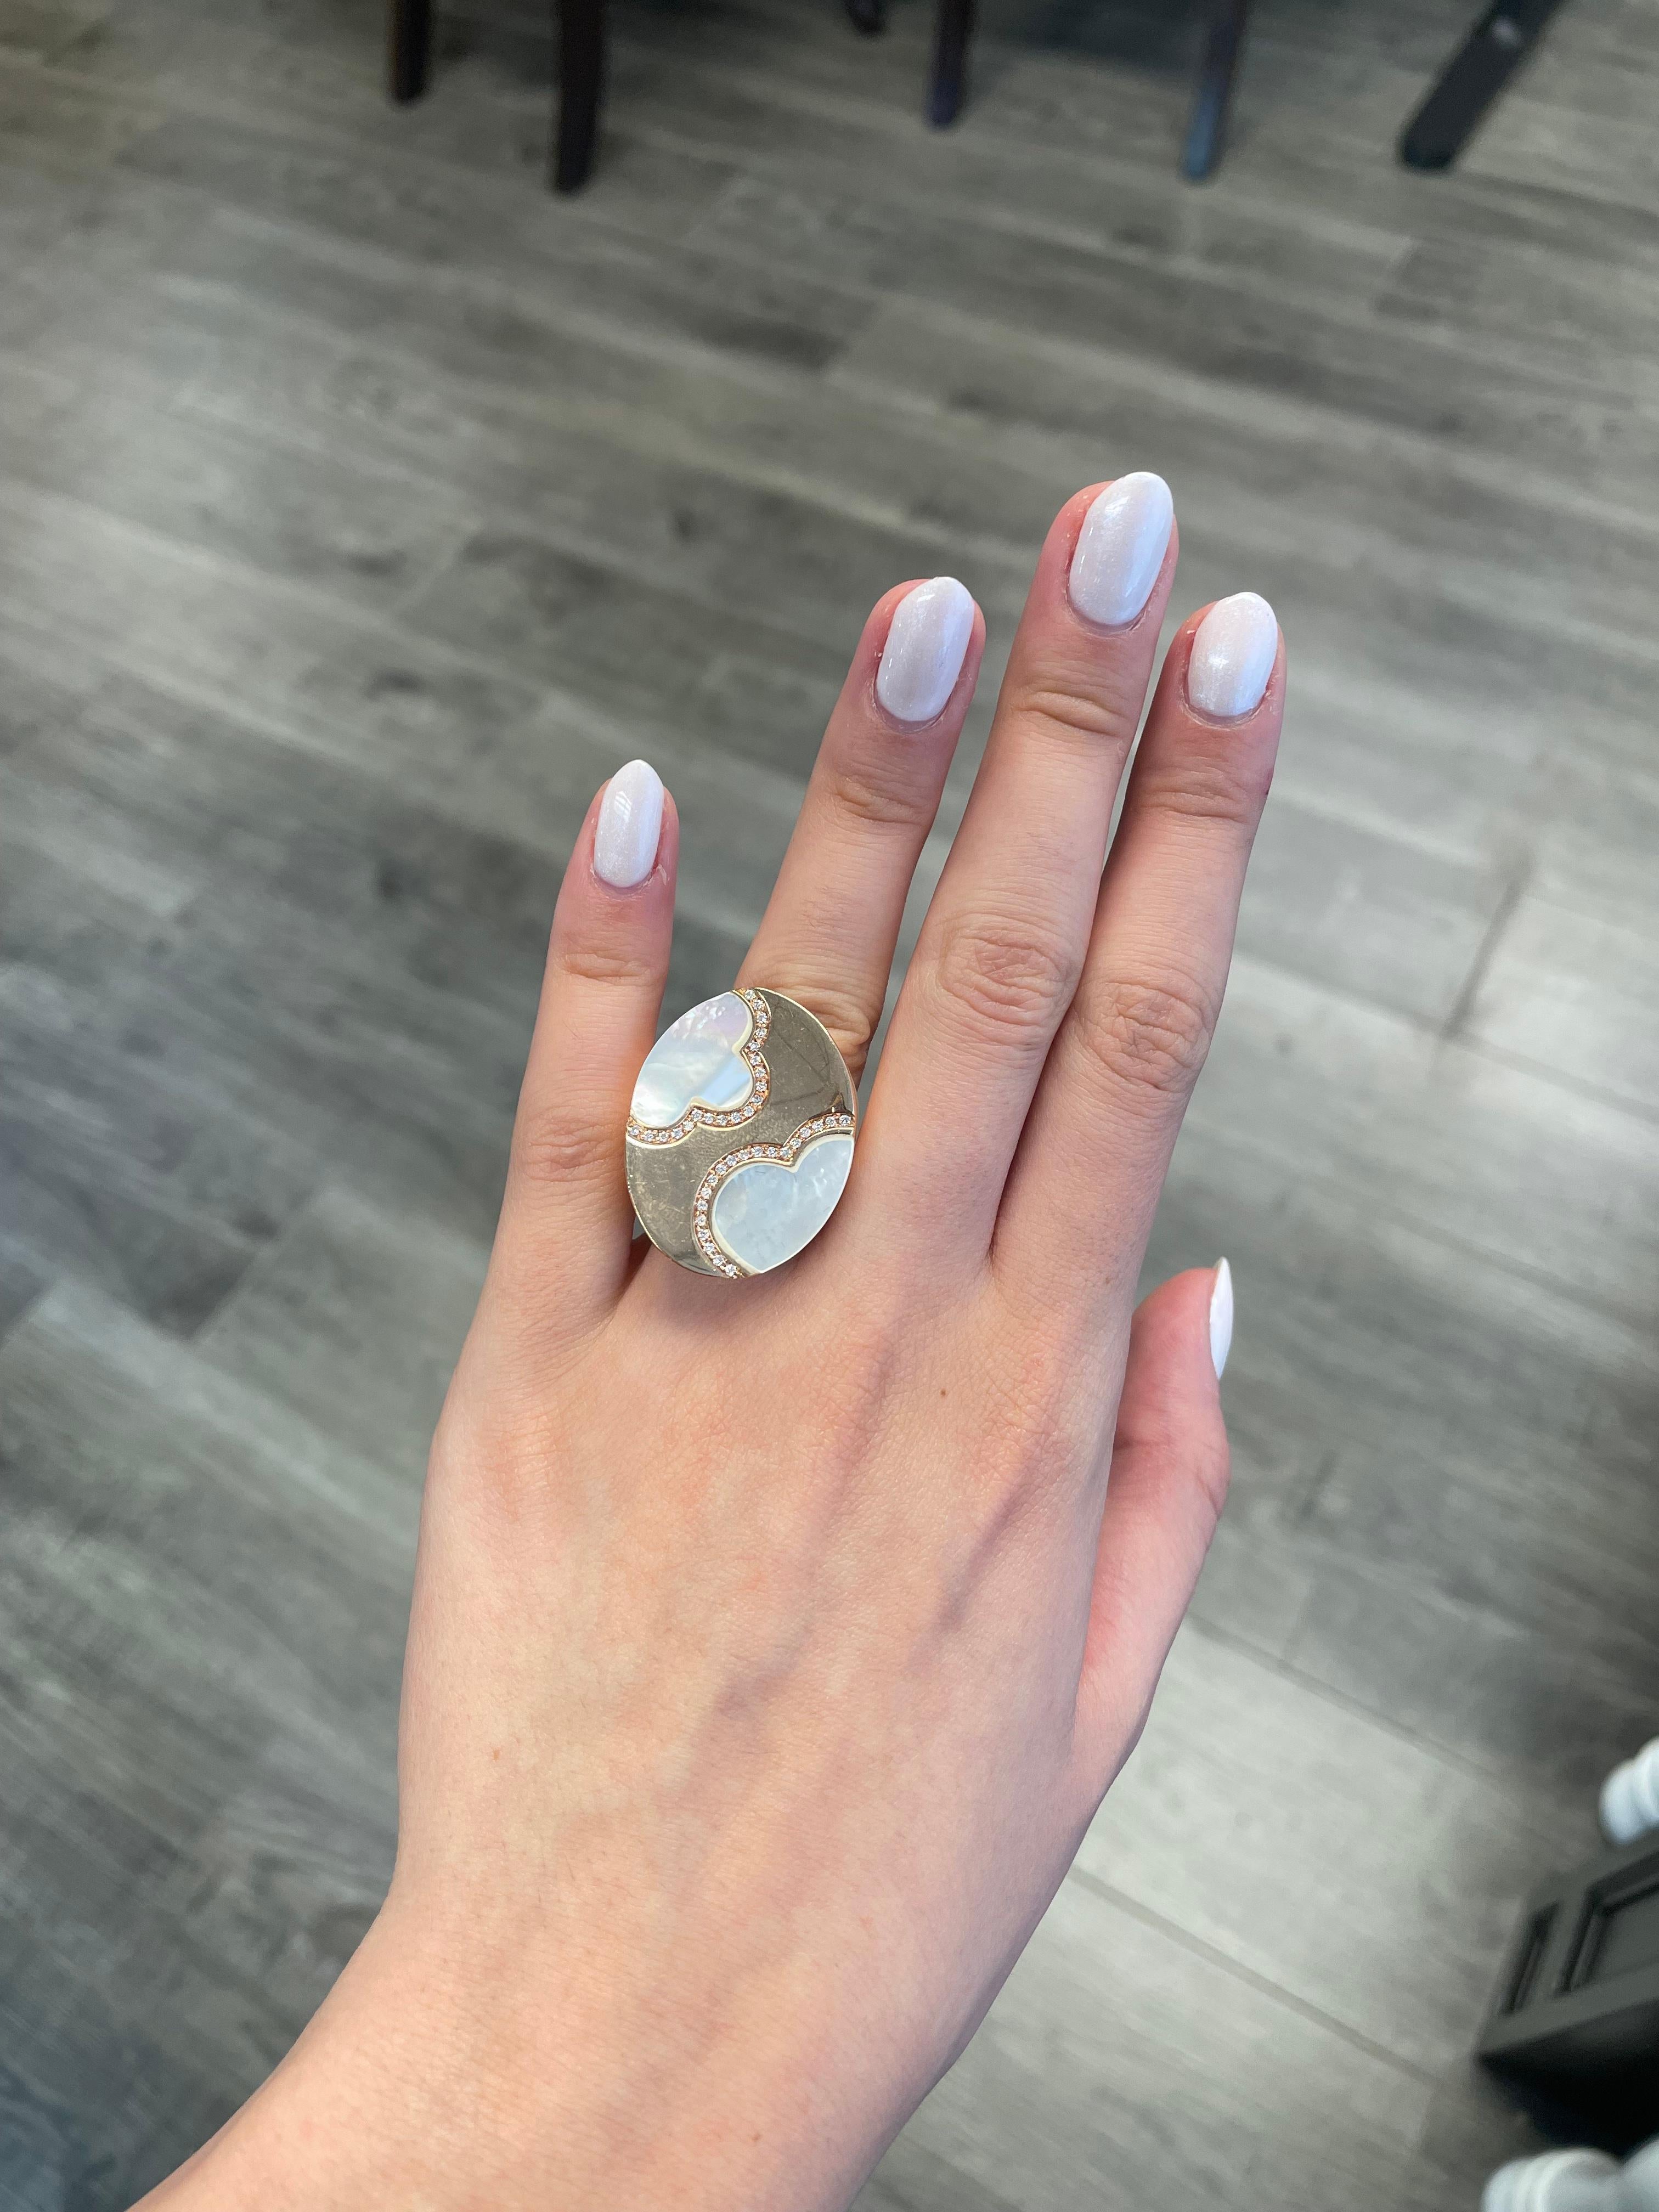 Exquisite custom carved mother-of-pearl with diamonds.
2 custom cut mother of pearls complimented by 0.26ct of round cut diamonds set in 18k rose gold.
Accommodated with an up to date appraisal by a GIA G.G. upon request. please contact us with any